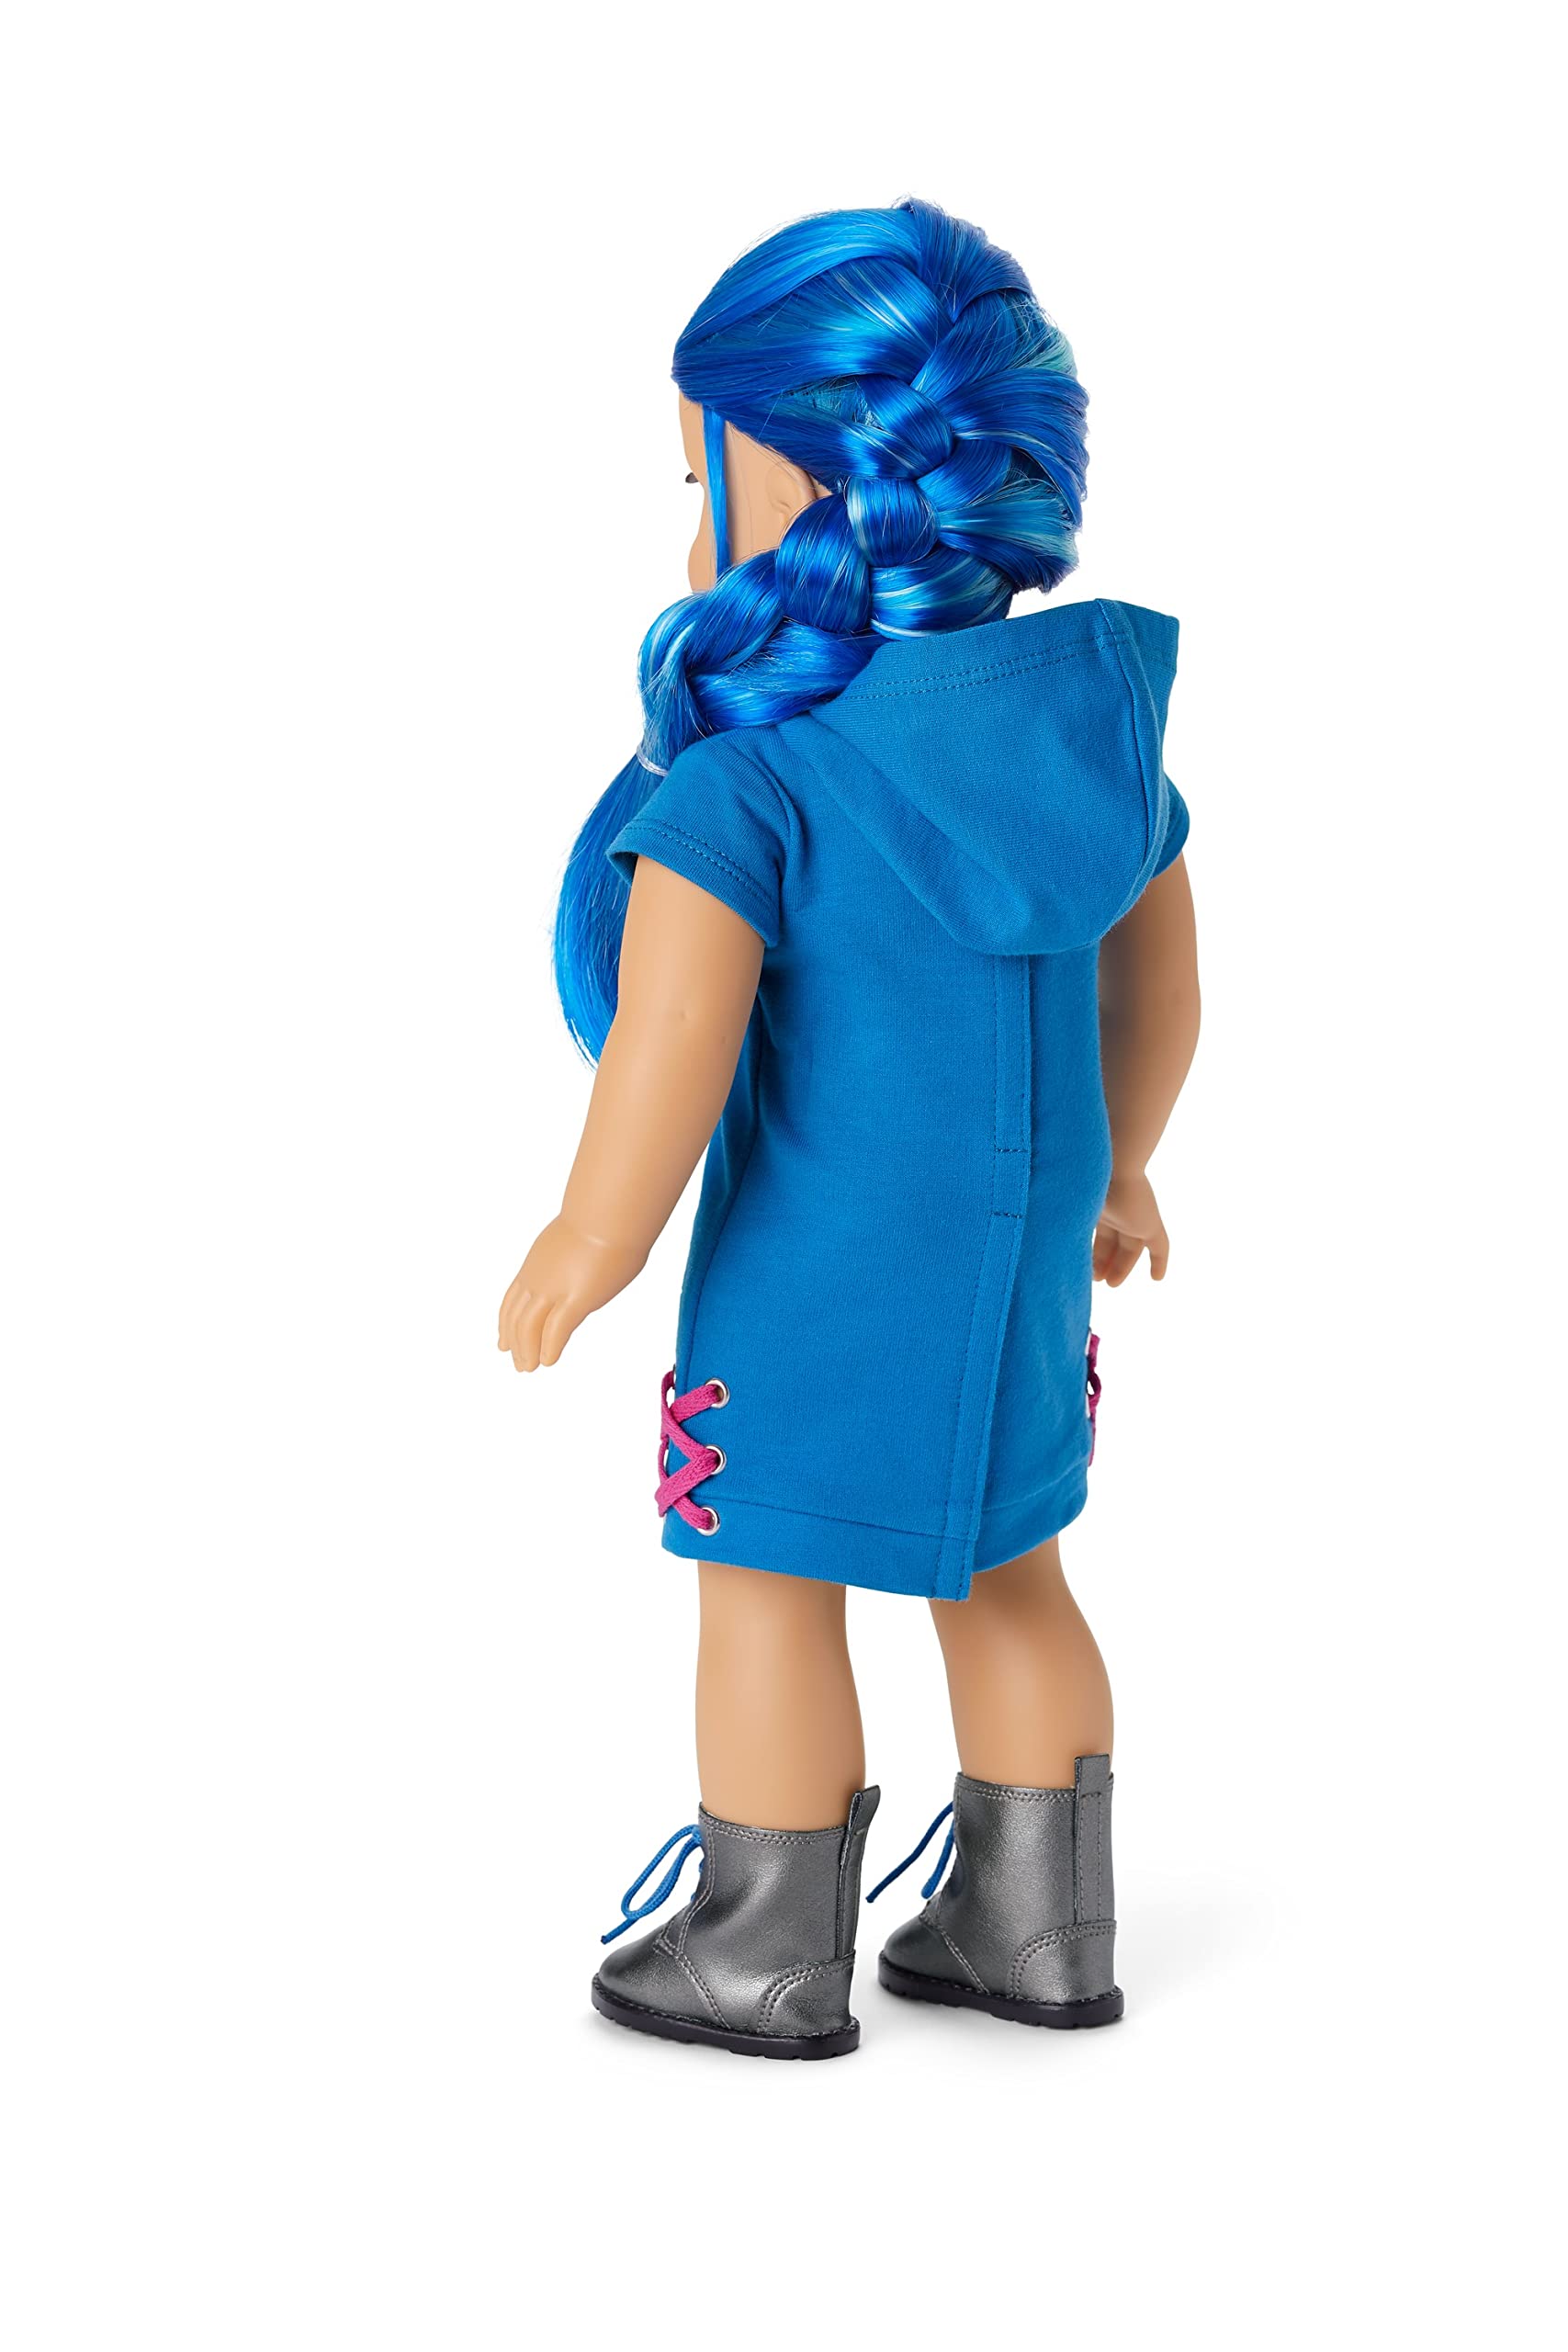 American Girl Truly Me 18-inch Doll #90 with Blue Eyes, Long Blue Hair, and Light-to-Medium Skin with Warm Undertones in Skater Dress